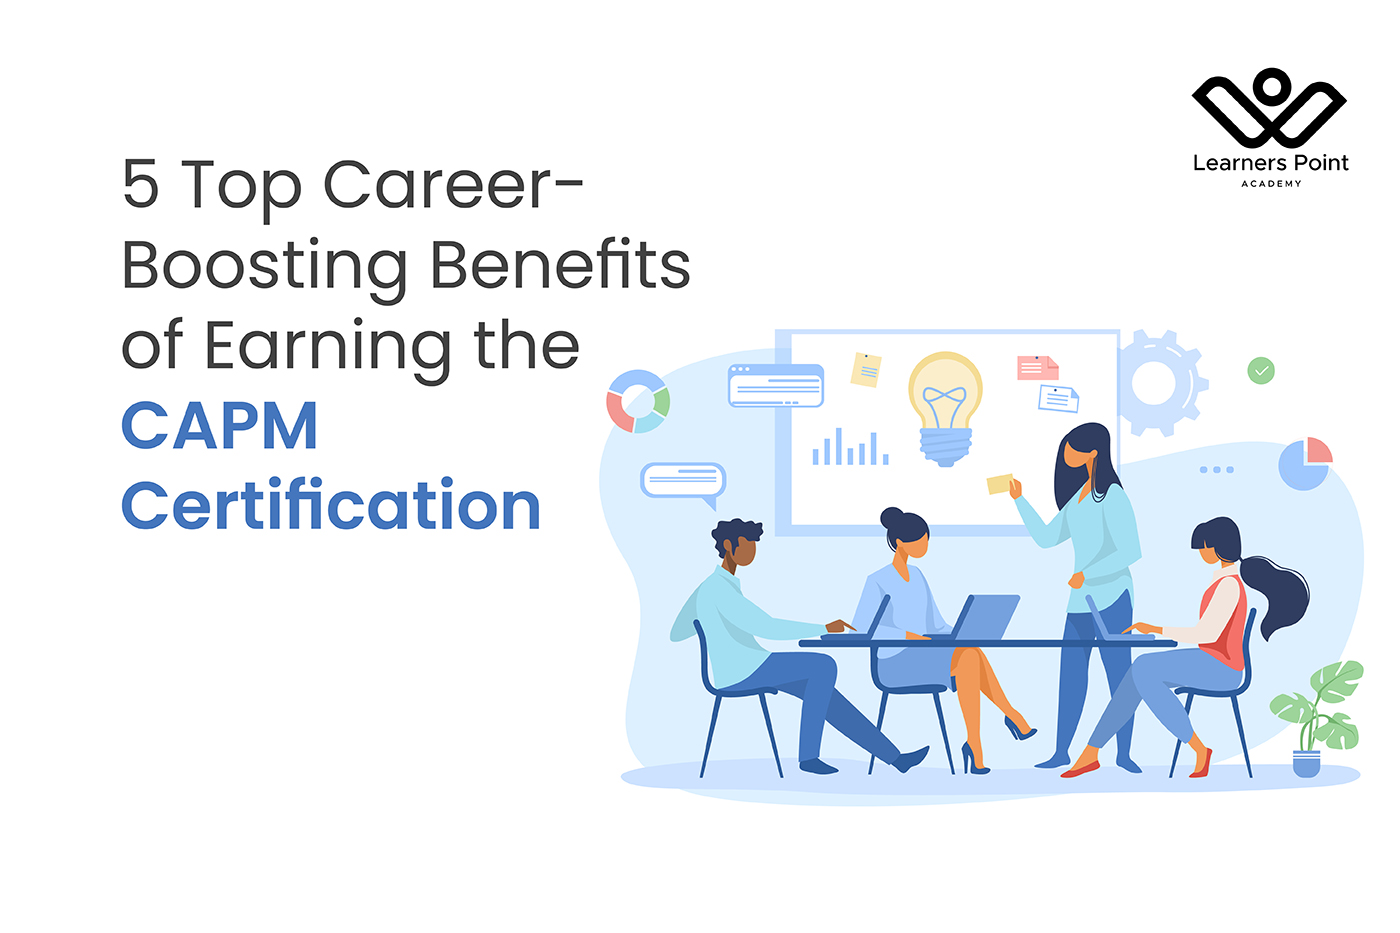 5 Top Career-Boosting Benefits of Earning the CAPM Certification